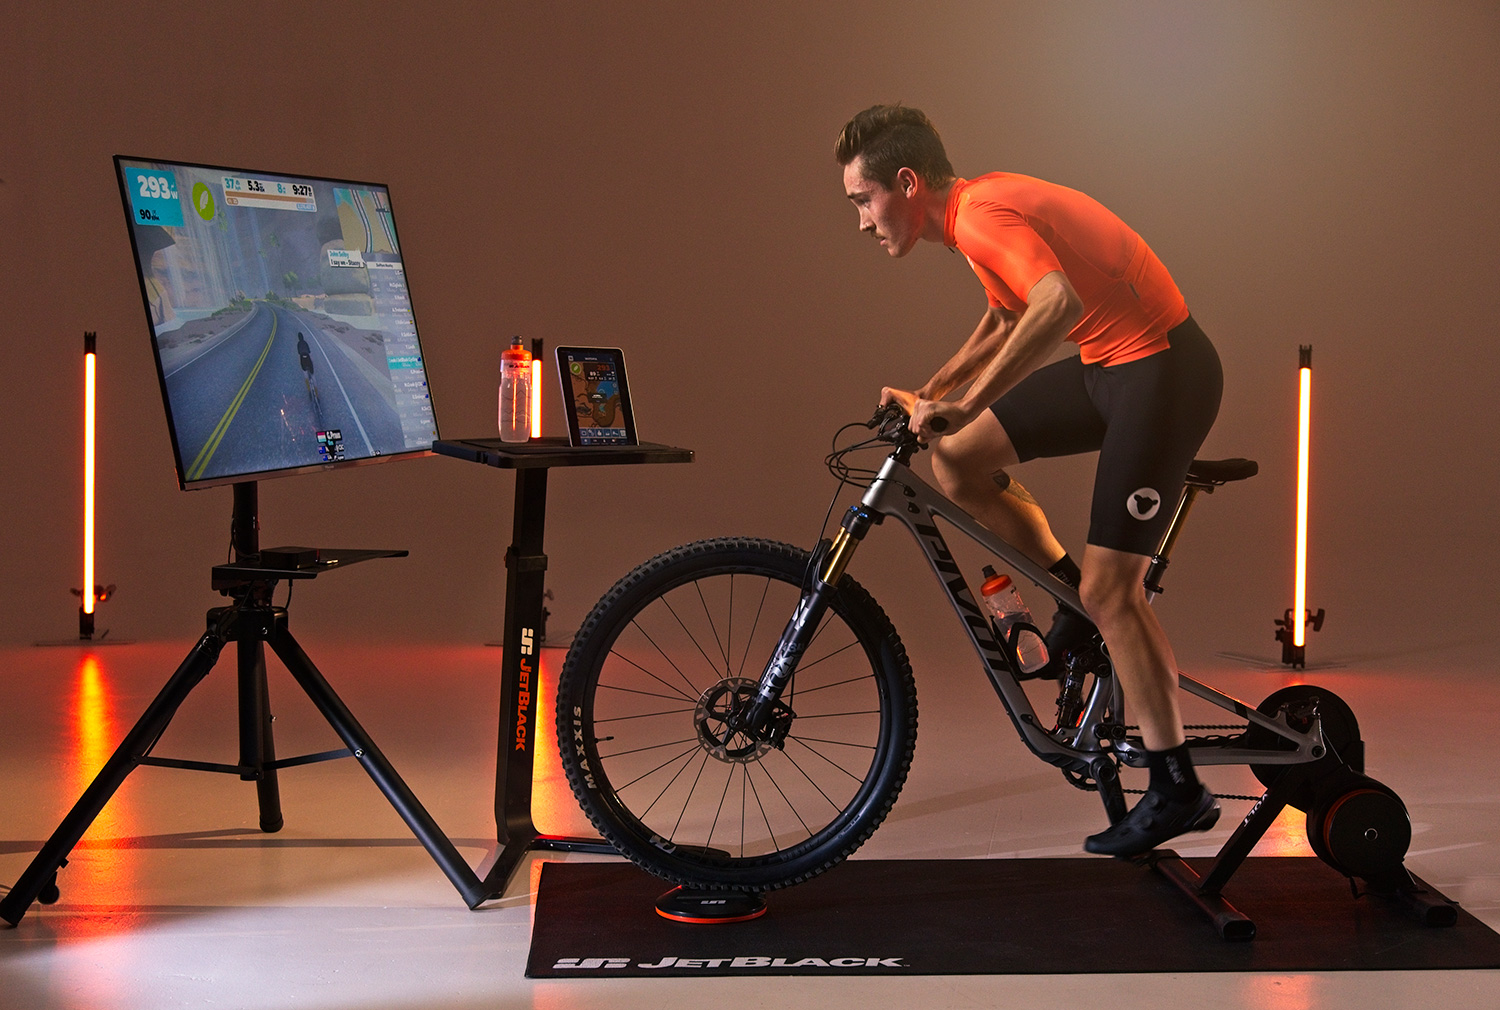 Smart Turn Block Levels Your Font Wheel Indoor Cycle Training.jpg